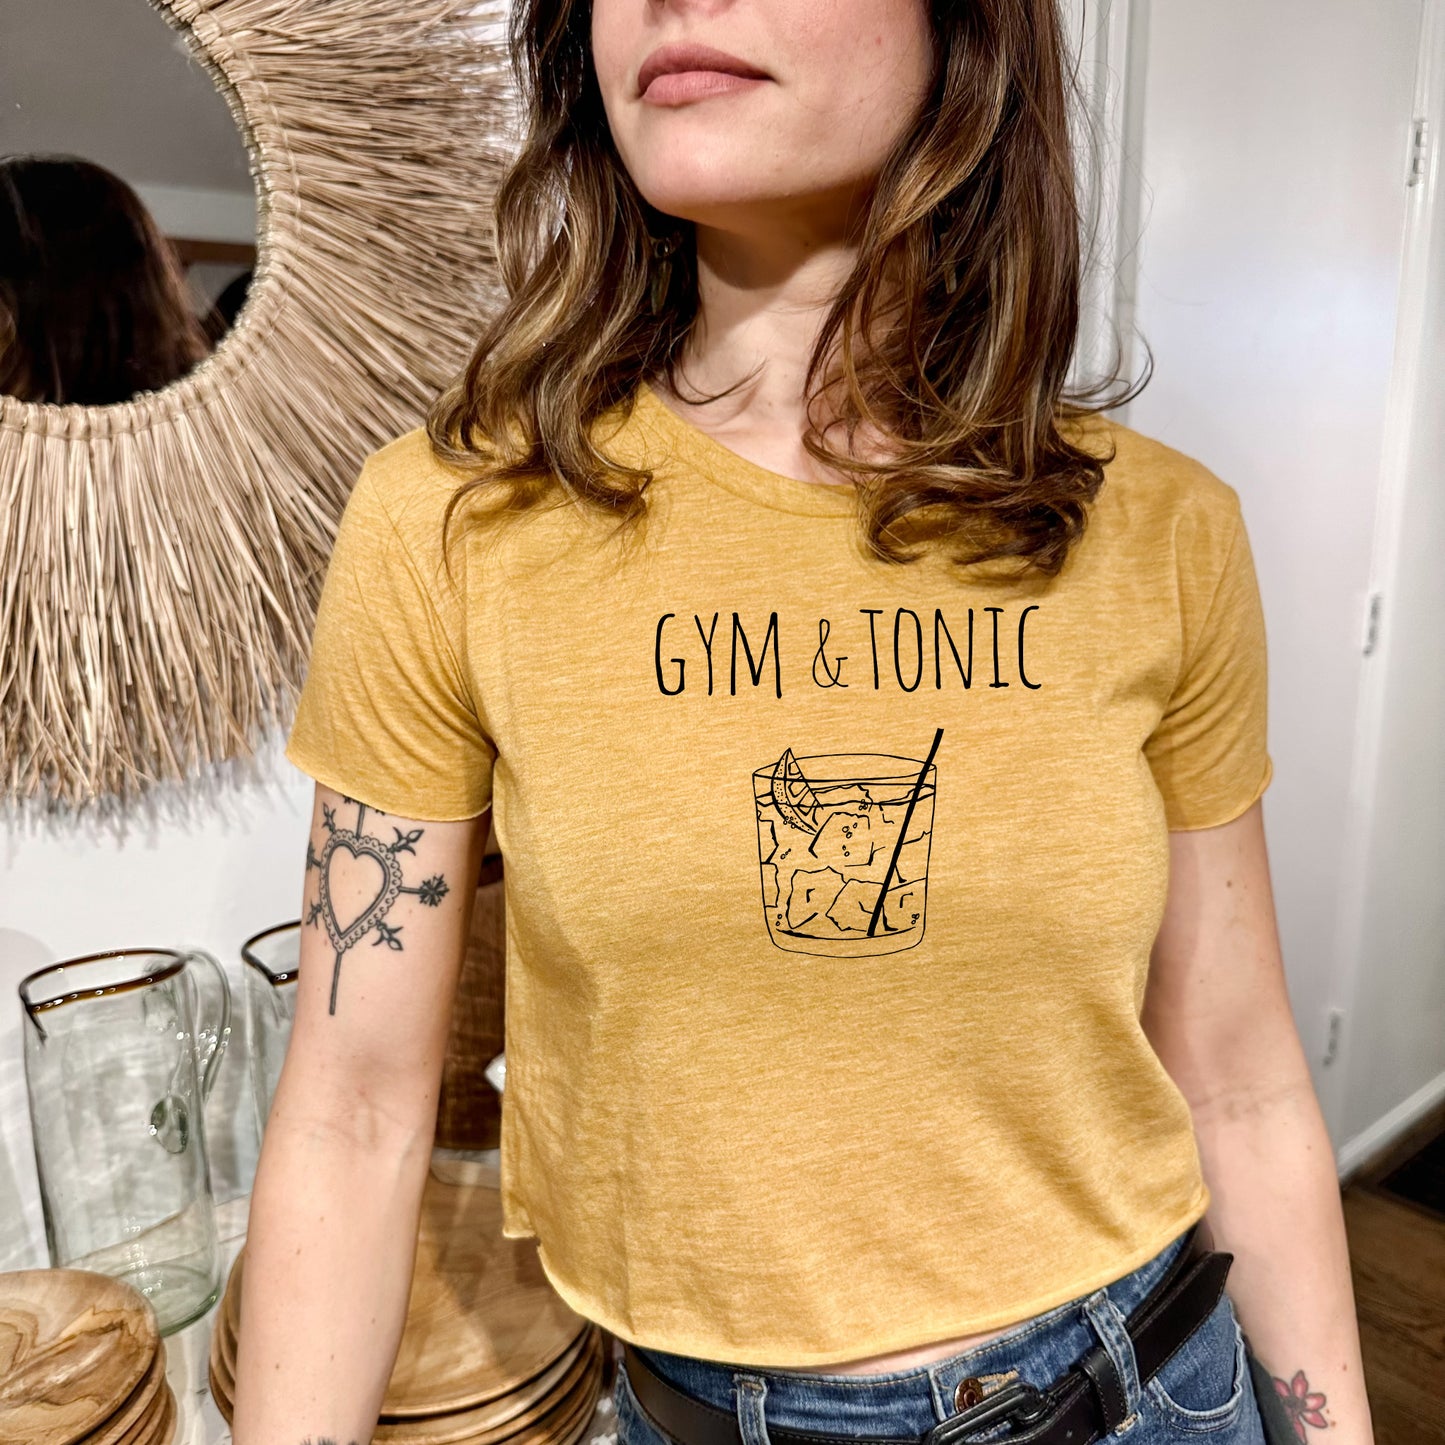 Gym & Tonic - Women's Crop Tee - Heather Gray or Gold